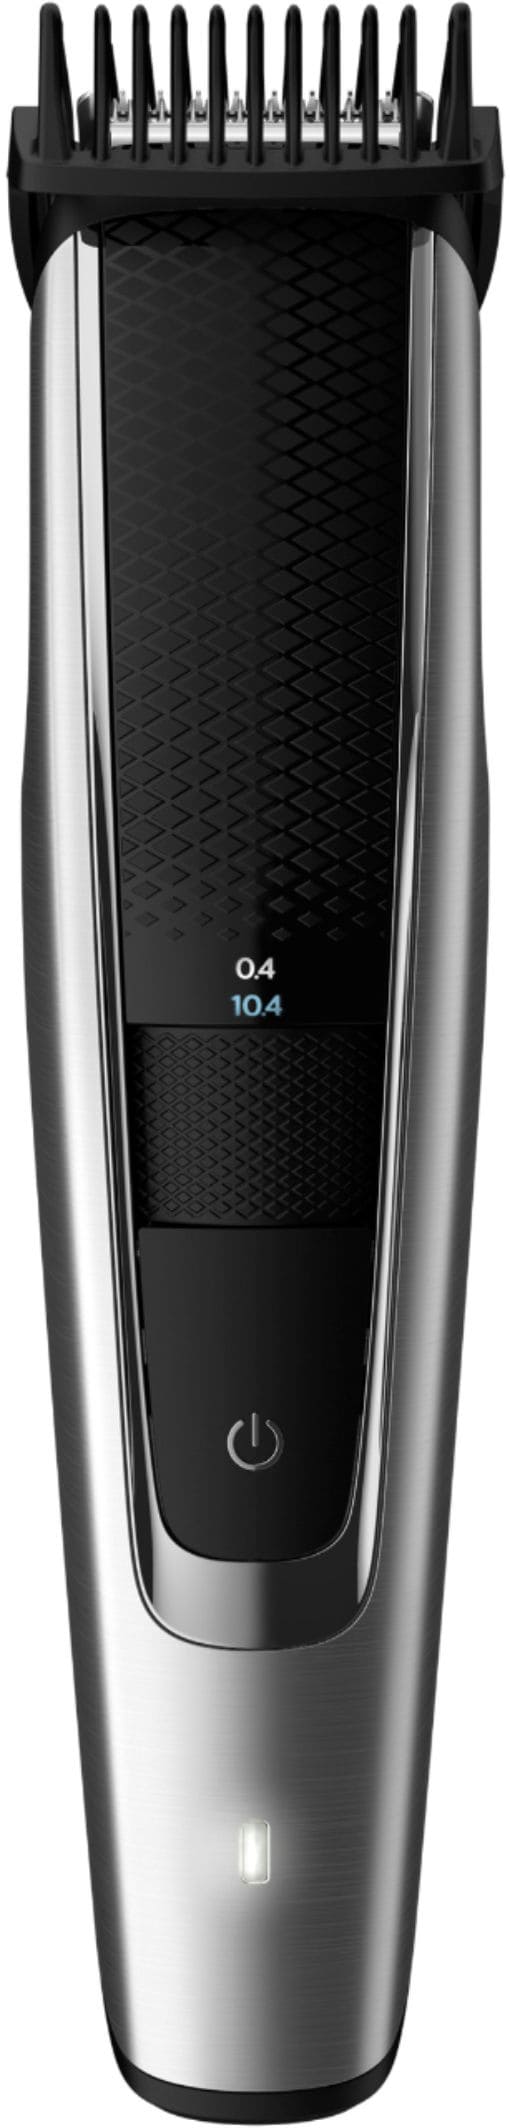 Philips Norelco - 5000 Series Hair Trimmer - Black/Silver_10